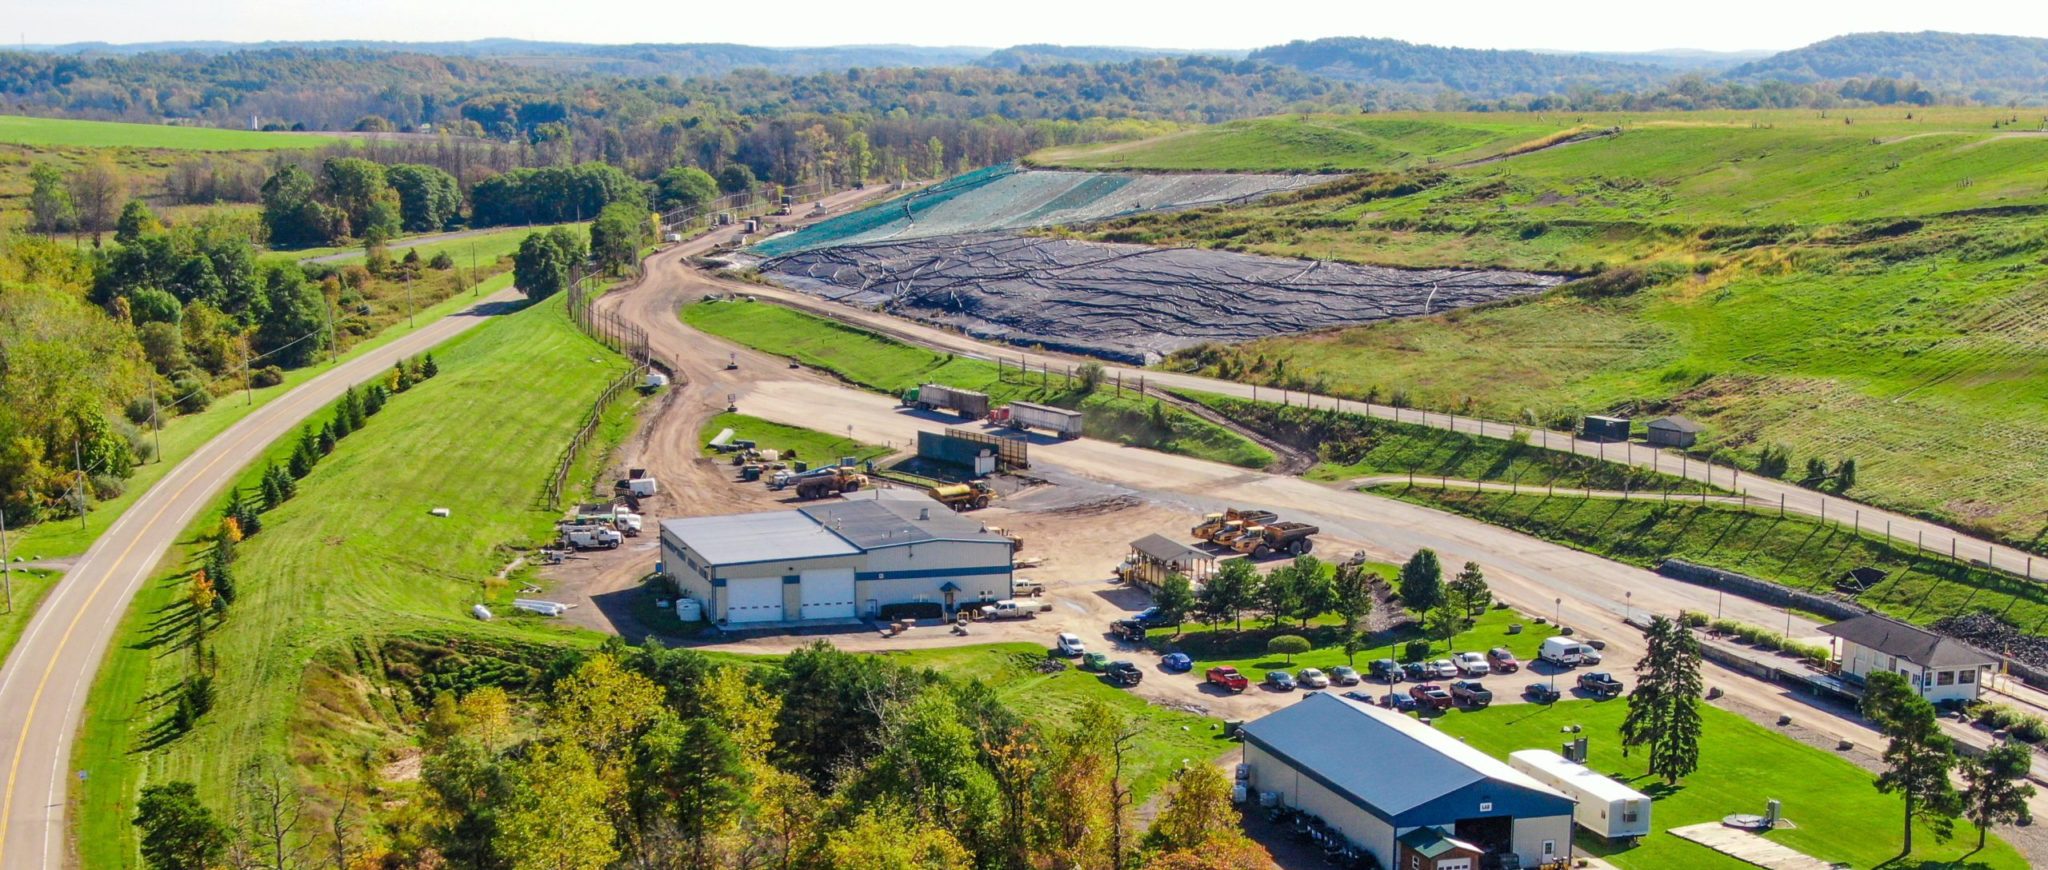 Landmark Green Amendment case against FLX area landfill heads to appeals court